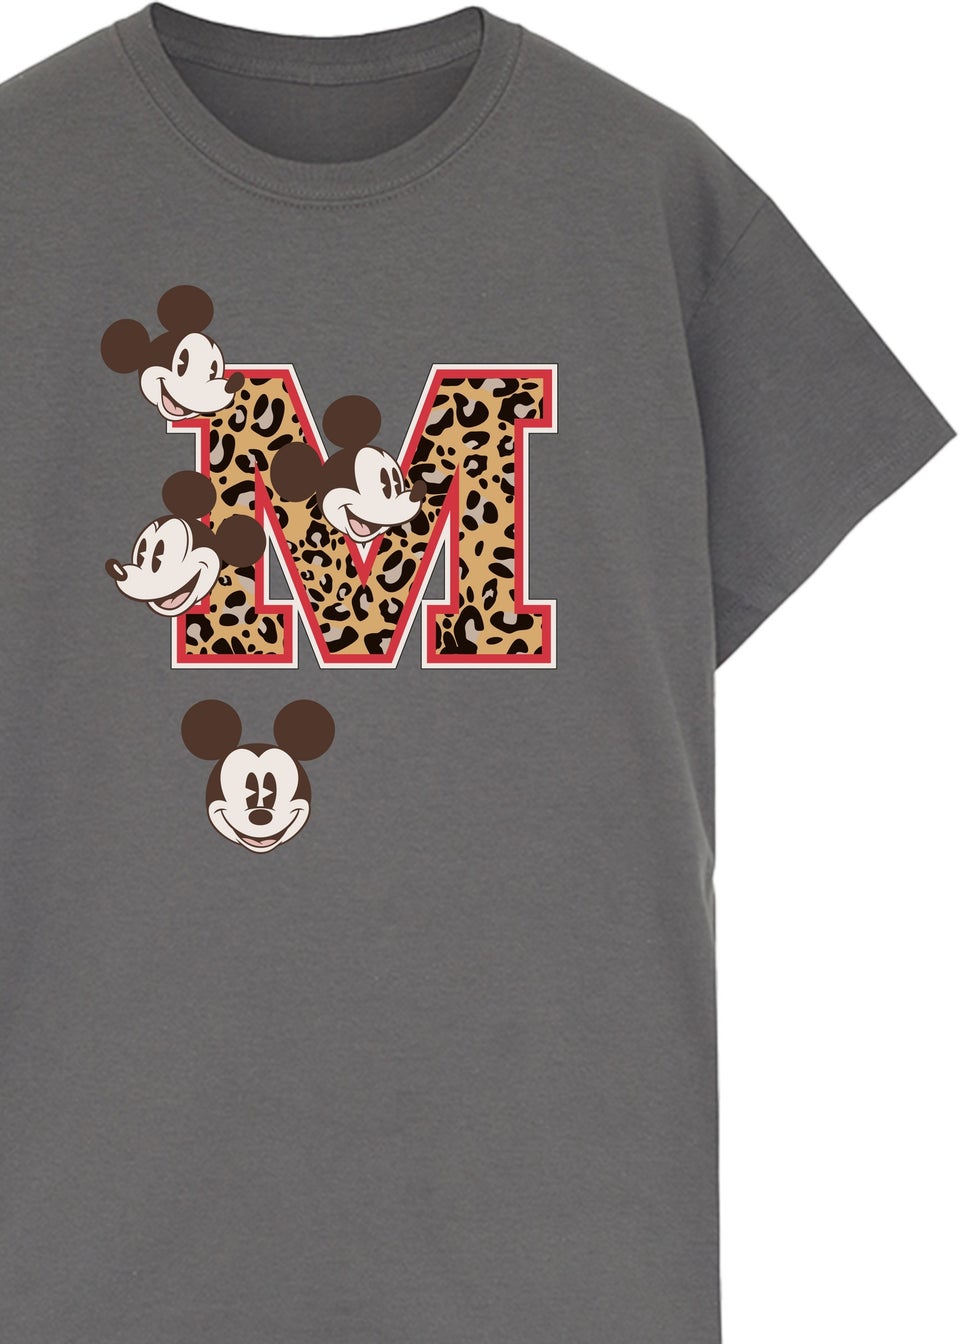 Disney Mickey Mouse M Faces Charcoal Printed Boyfriend Fit T-Shirt